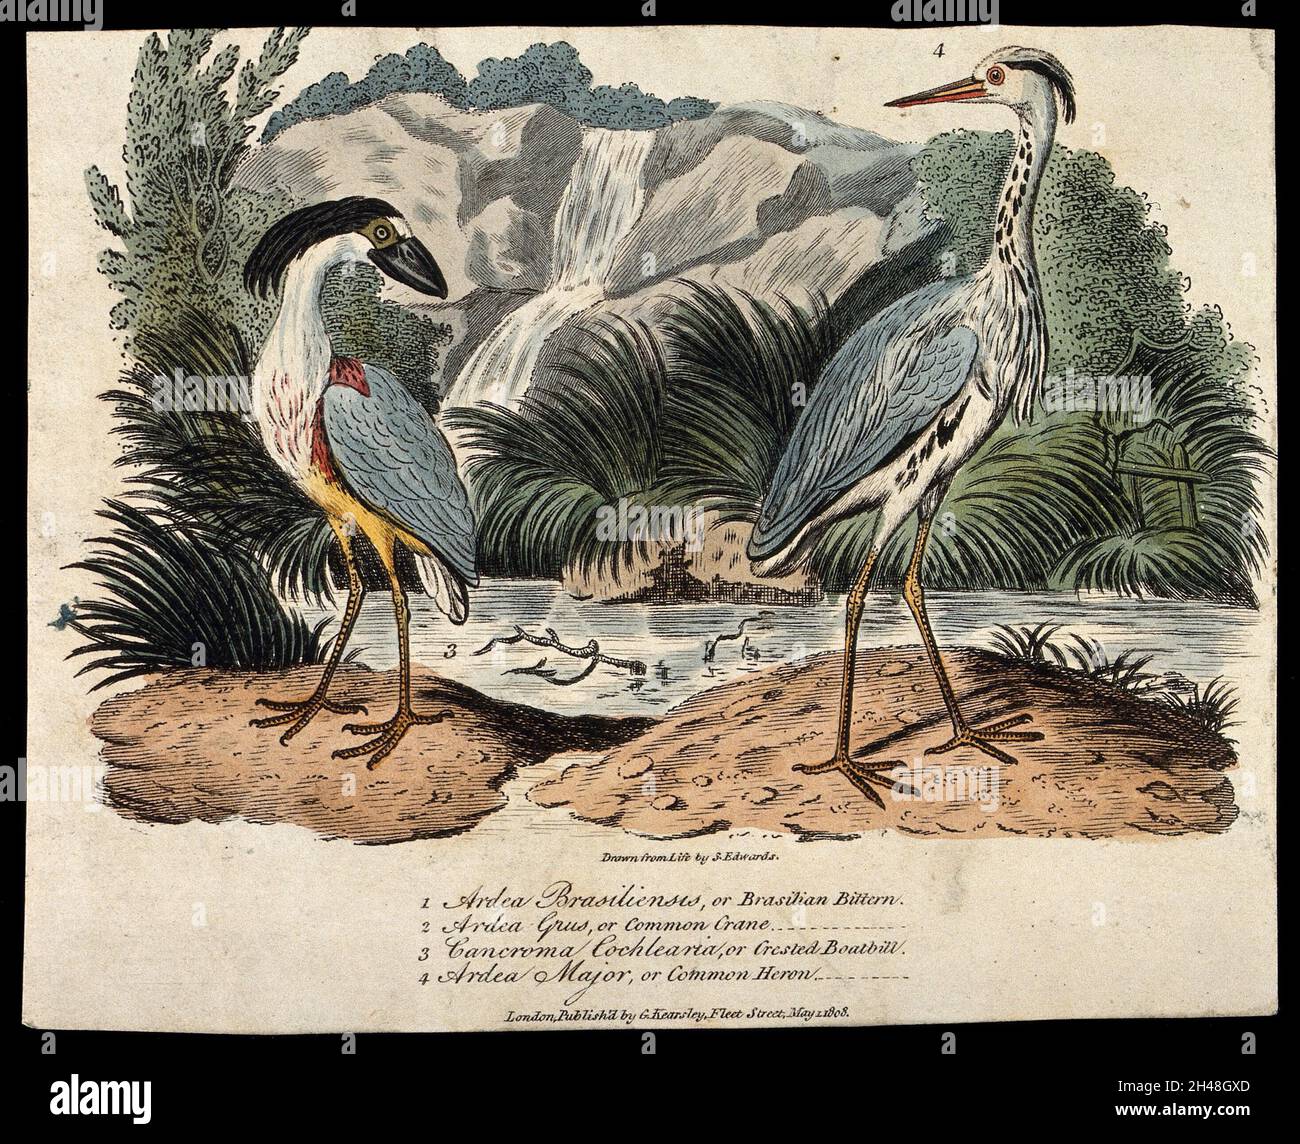 A crested boatbill (Cancroma cochlearia) and common heron (Ardea cinerea). Coloured engraving, ca. 1808, after S. Edwards. Stock Photo